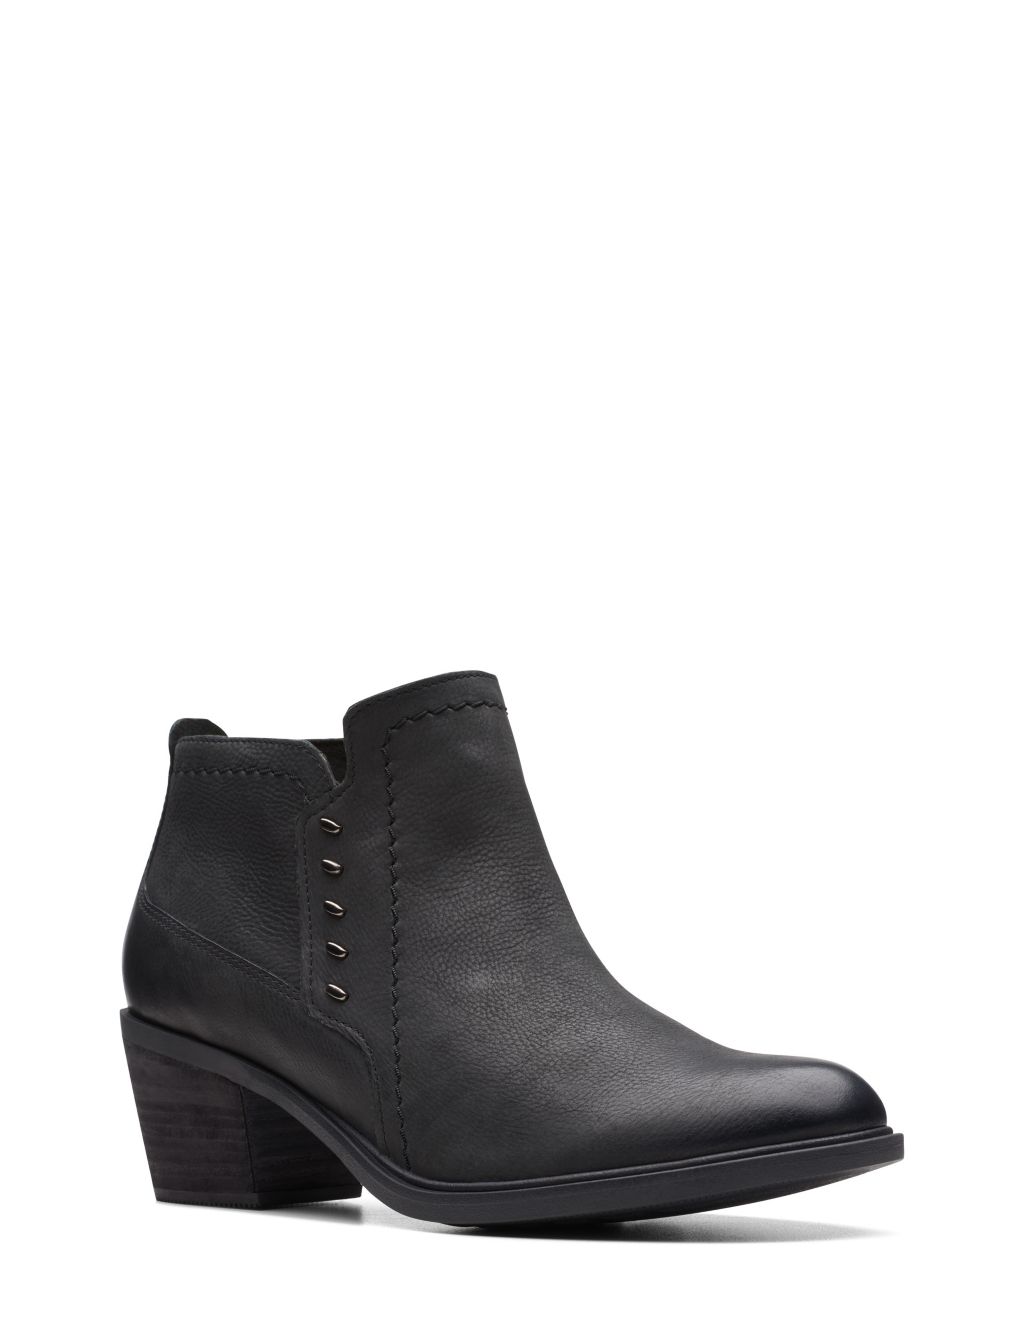 Leather Cowboy Block Heel Ankle Boots image 2